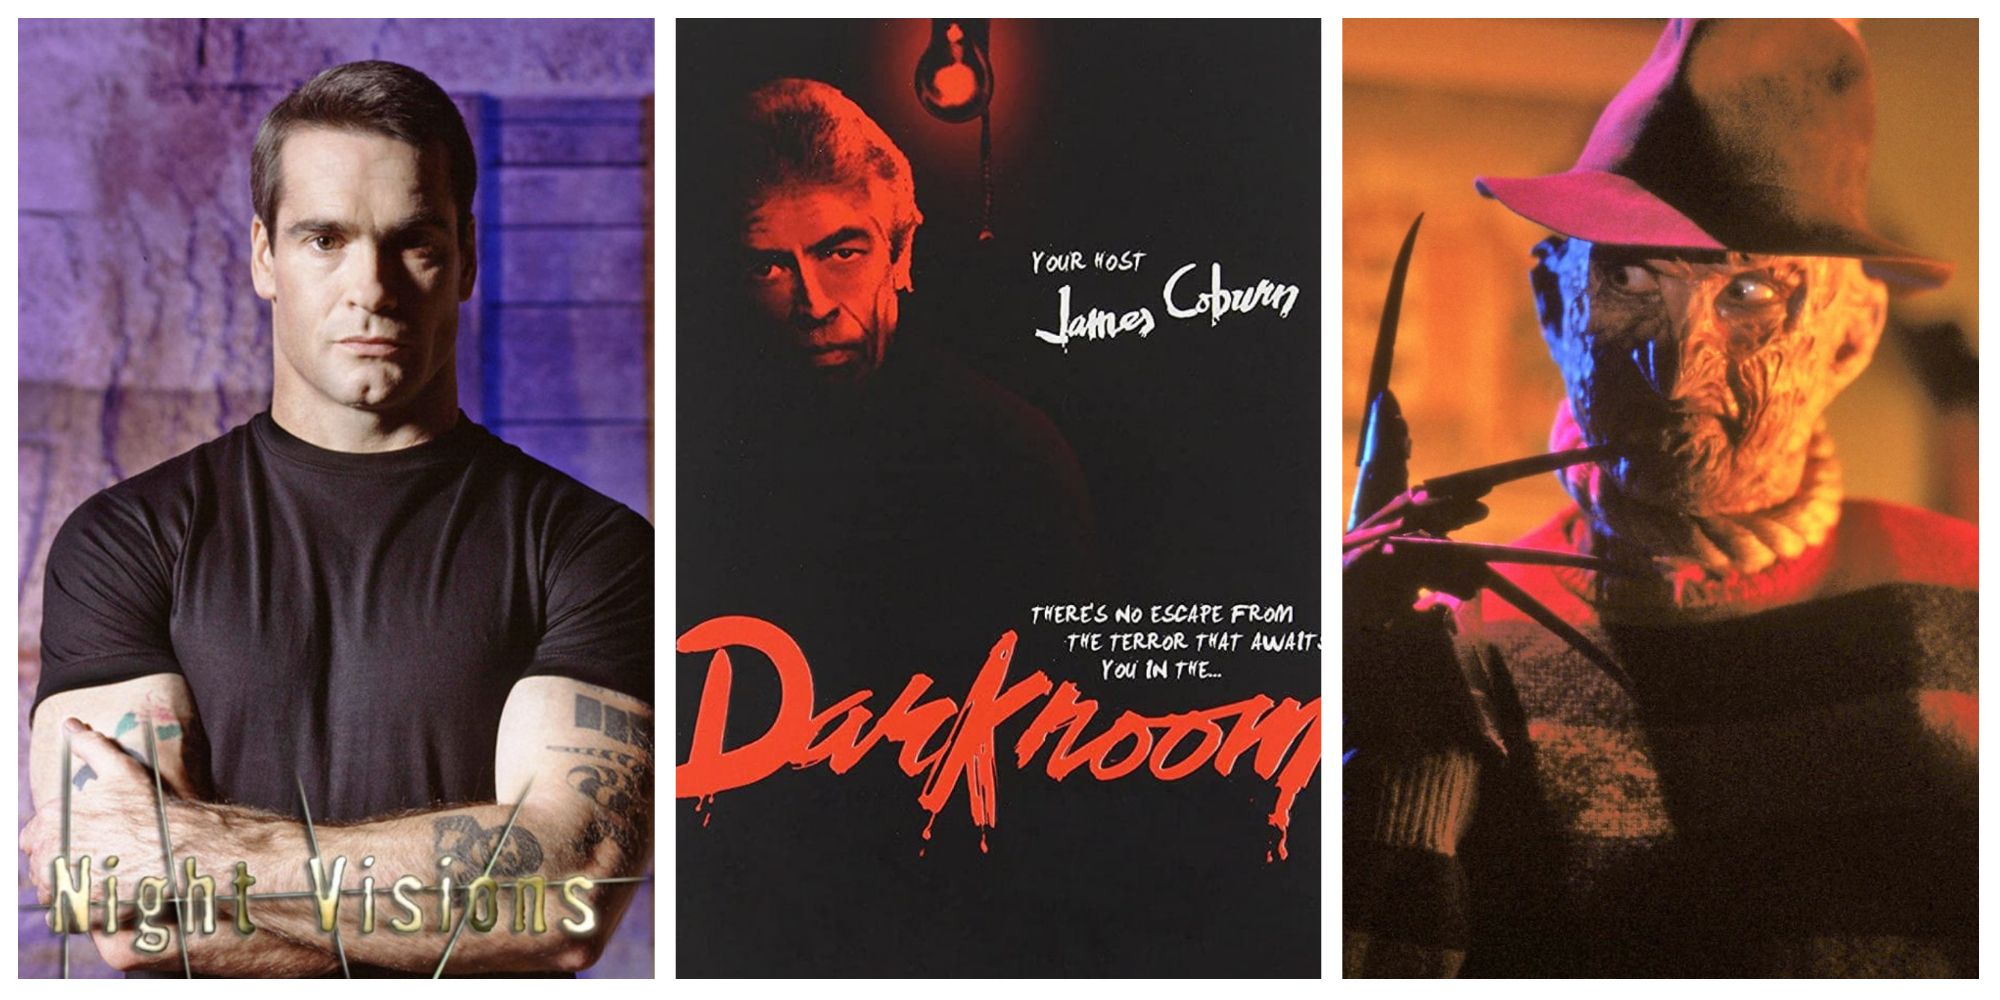 Forgotten Anthology Horror Shows Night Visions Darkroom Freddy's Nightmares